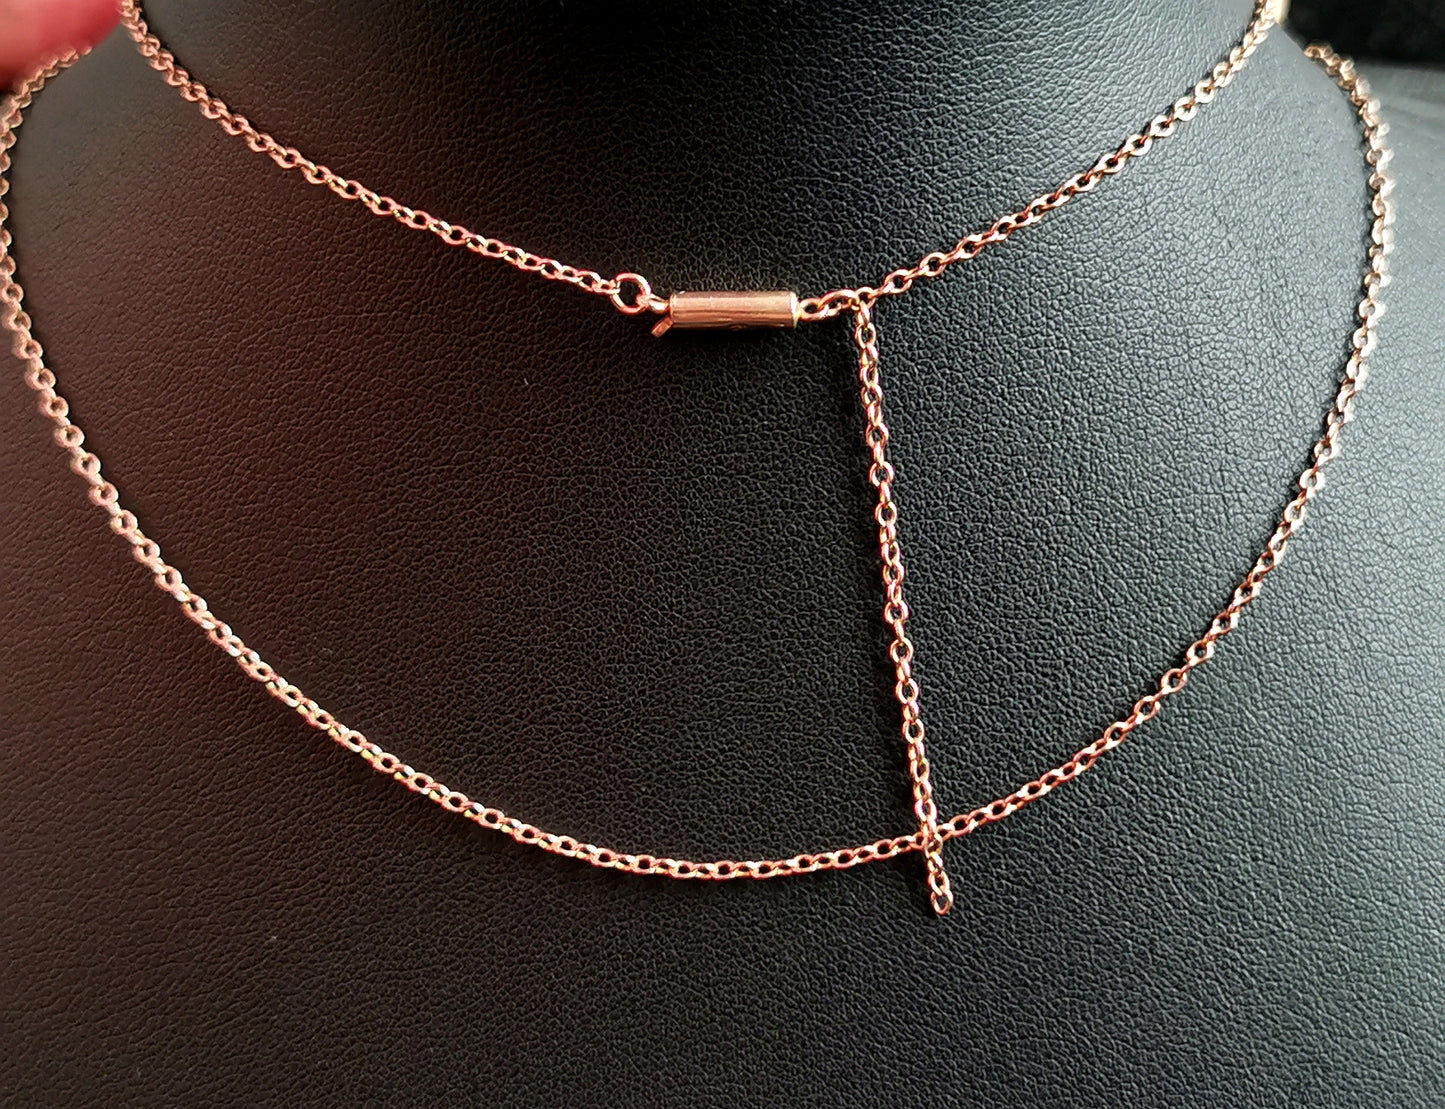 Antique 9ct Rose gold trace link chain necklace, Edwardian